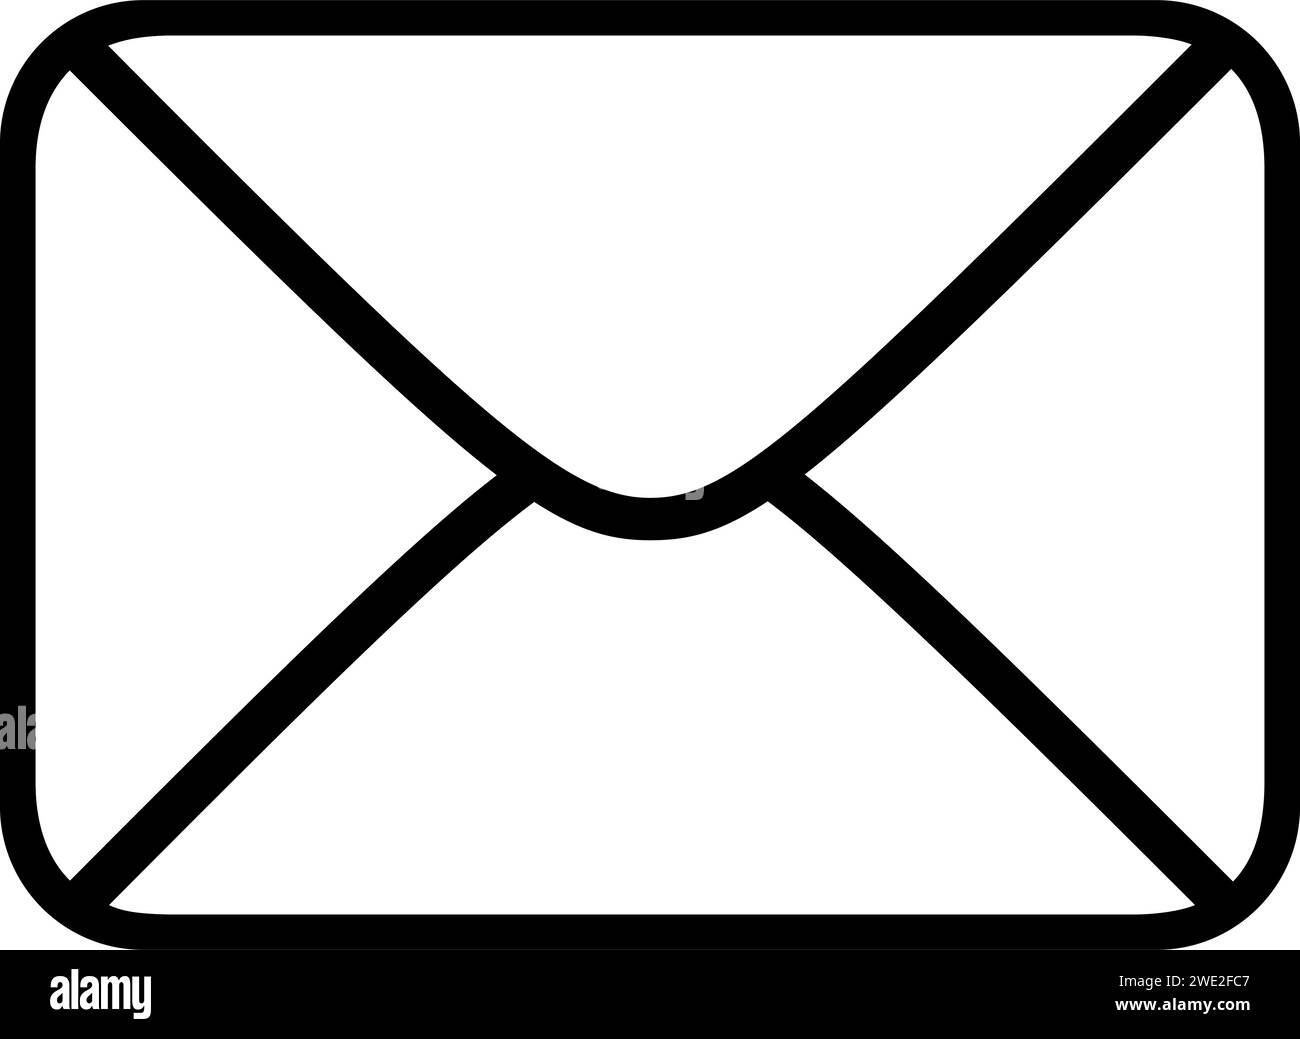 Black letter, email icon Stock Vector